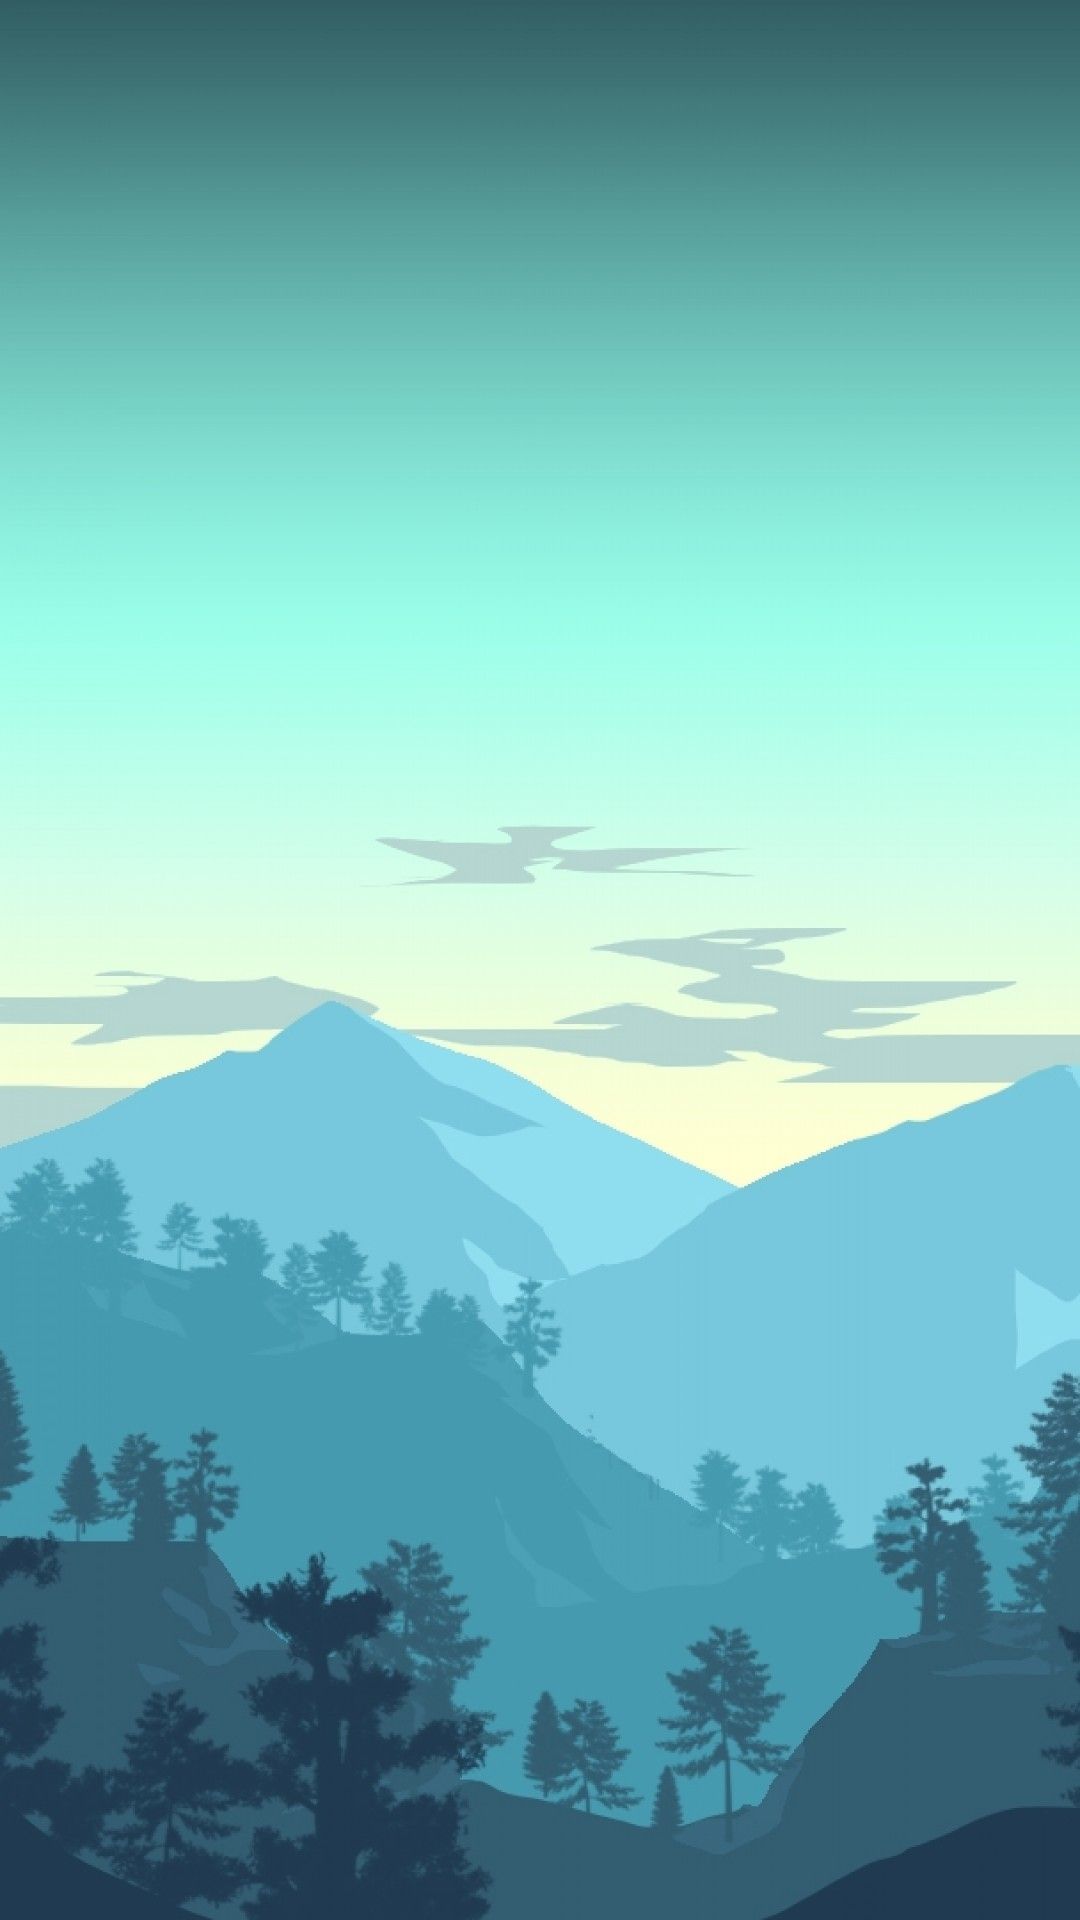 A minimalist landscape illustration of a forested mountain range against a blue sky - Pastel minimalist